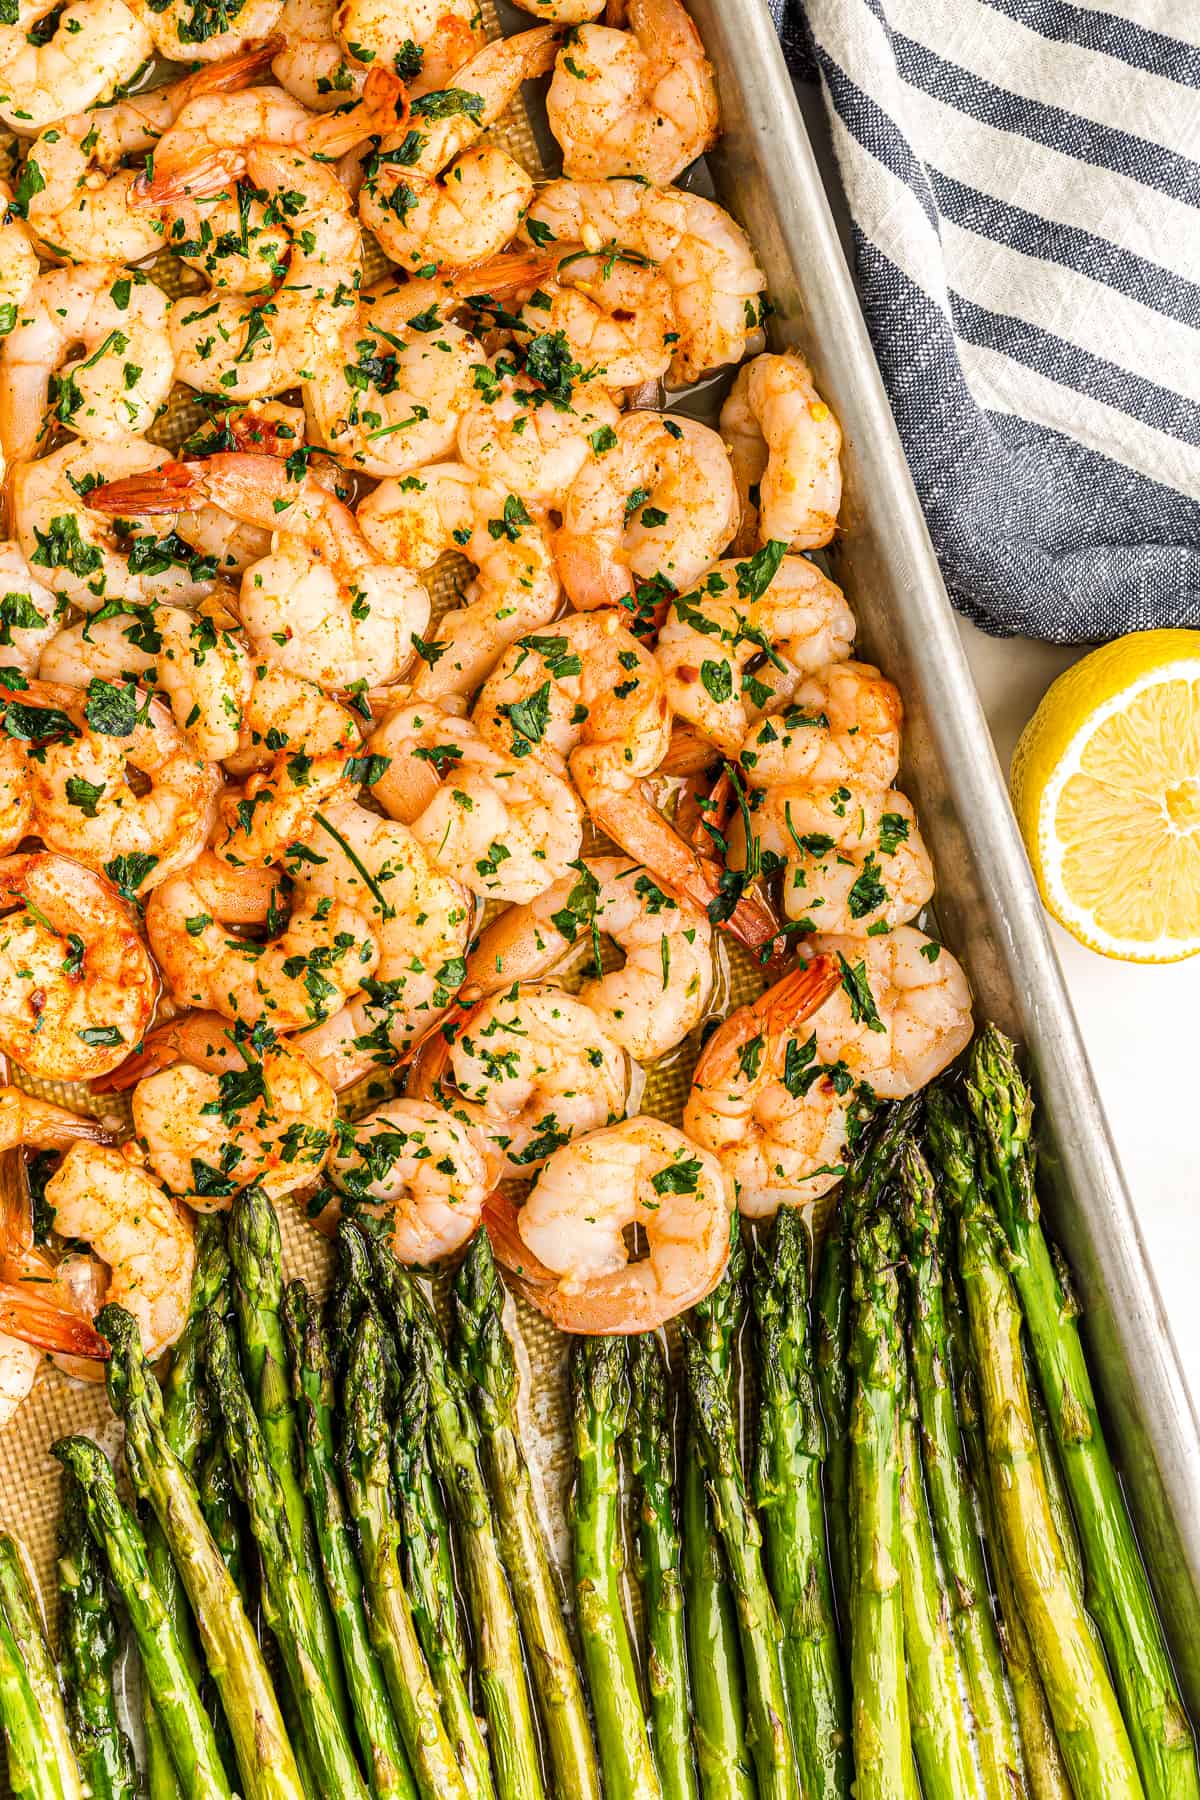 https://www.thecookierookie.com/wp-content/uploads/2020/08/shrimp-and-asparagus-sheet-pan-3-of-7.jpg